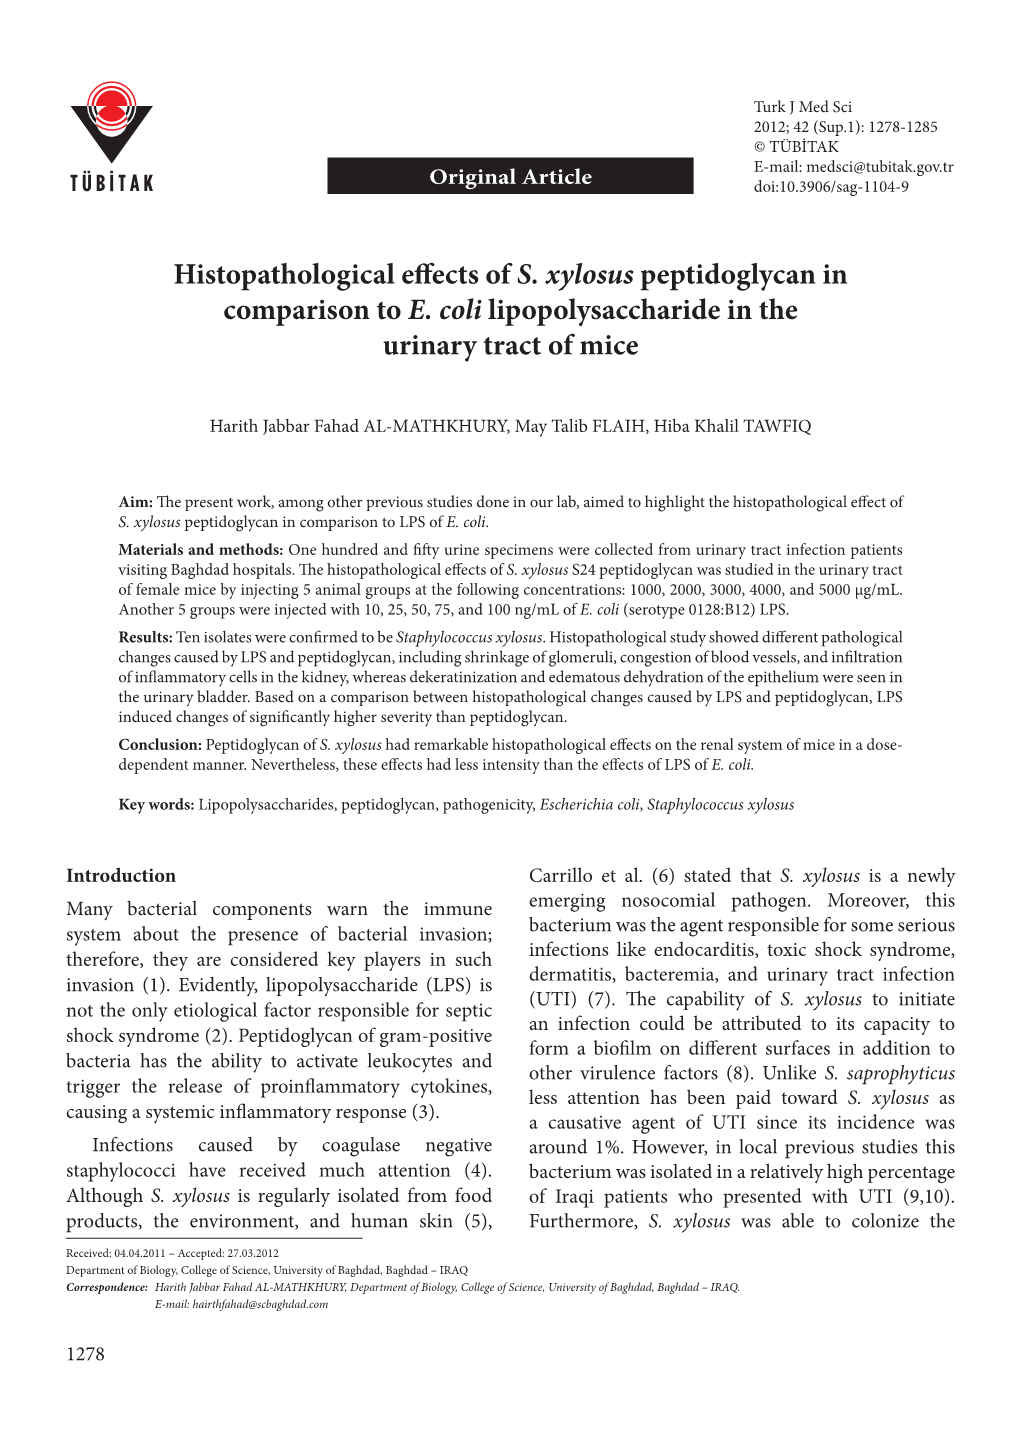 Histopathological Effects of S. Xylosus Peptidoglycan in Comparison to E